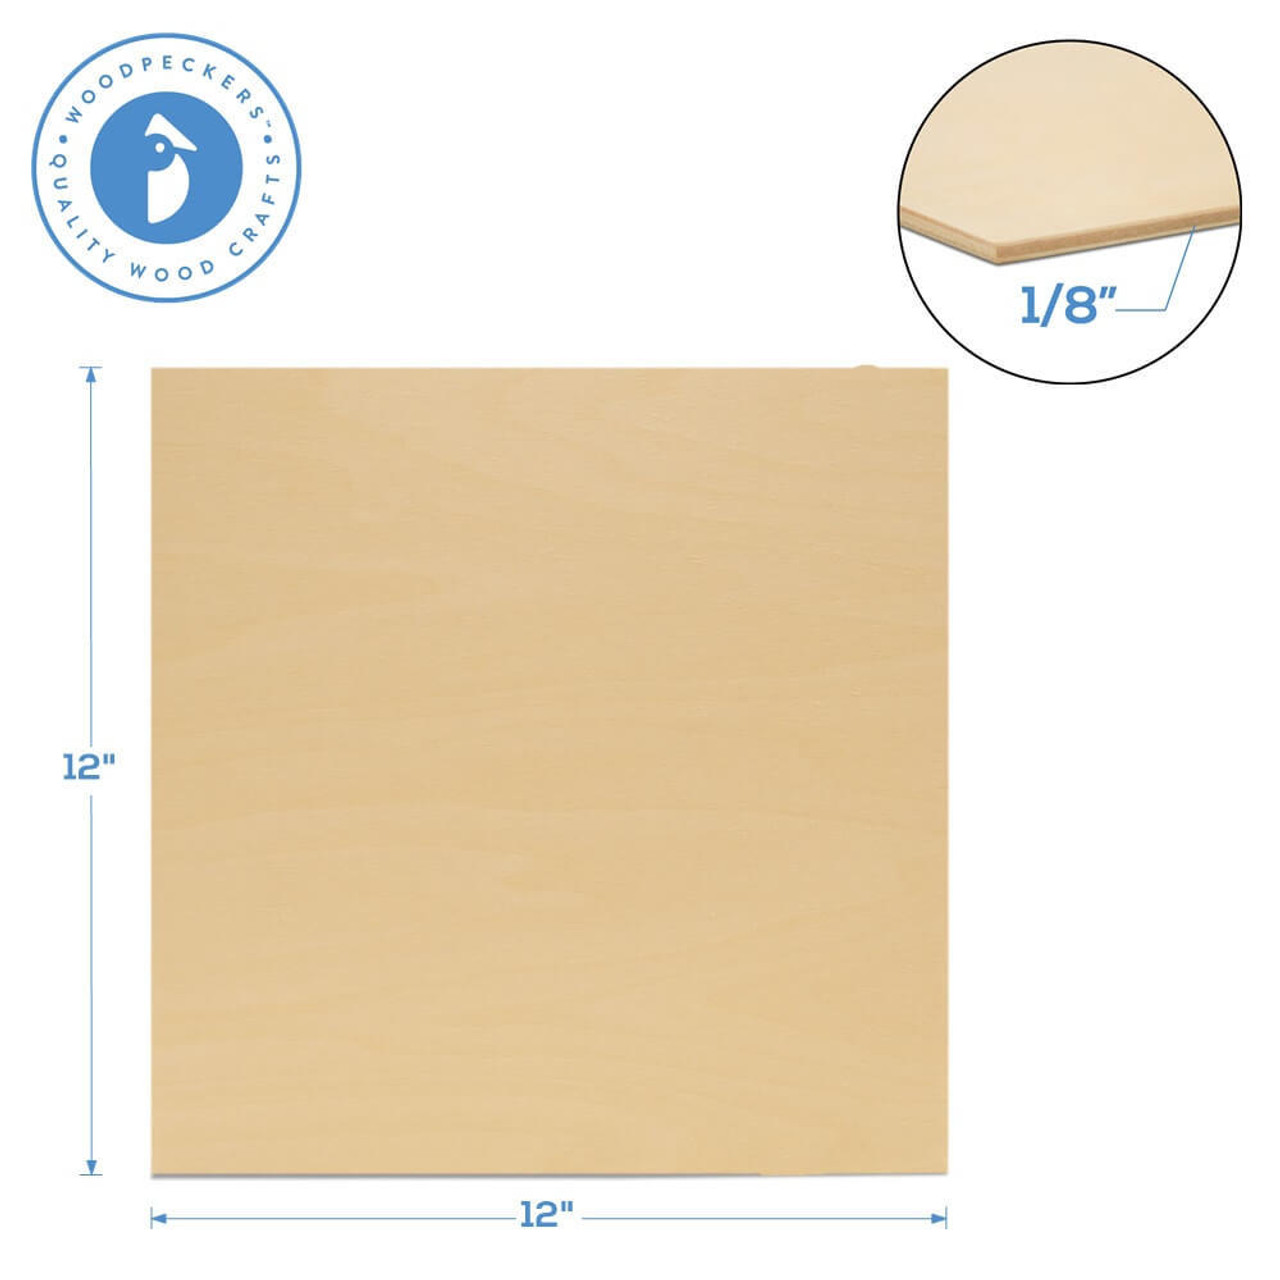 1/8 x 12 x 12 Aromatic Cedar Plywood - Perfect Laser Cutting & Engraving  - Cherokee Wood Products (16pcs) 